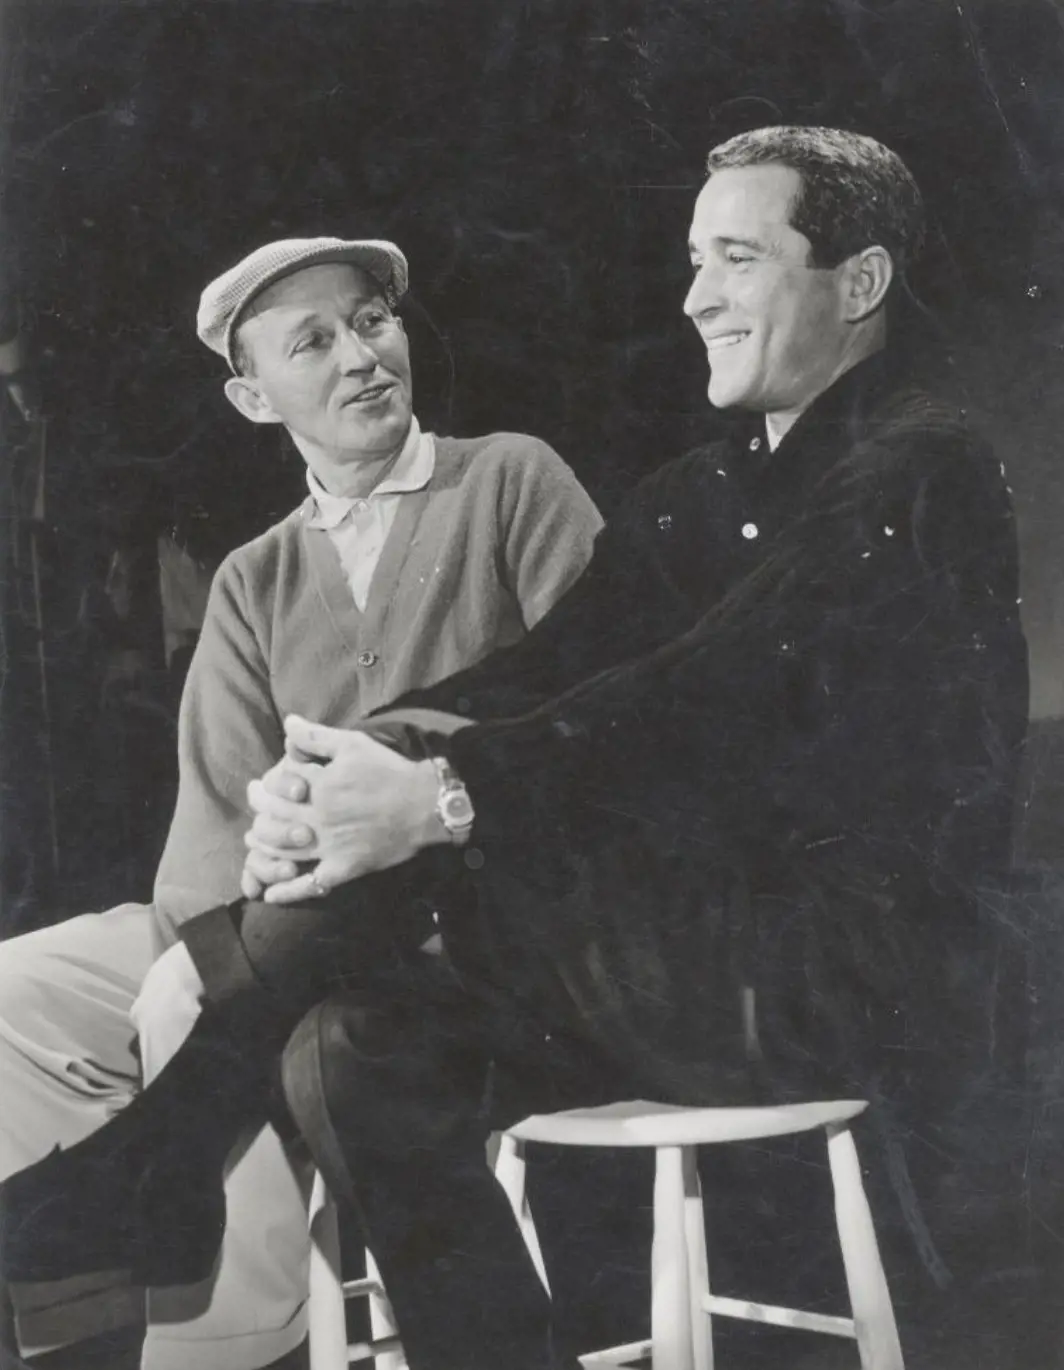 Bing Crosby in one of his play